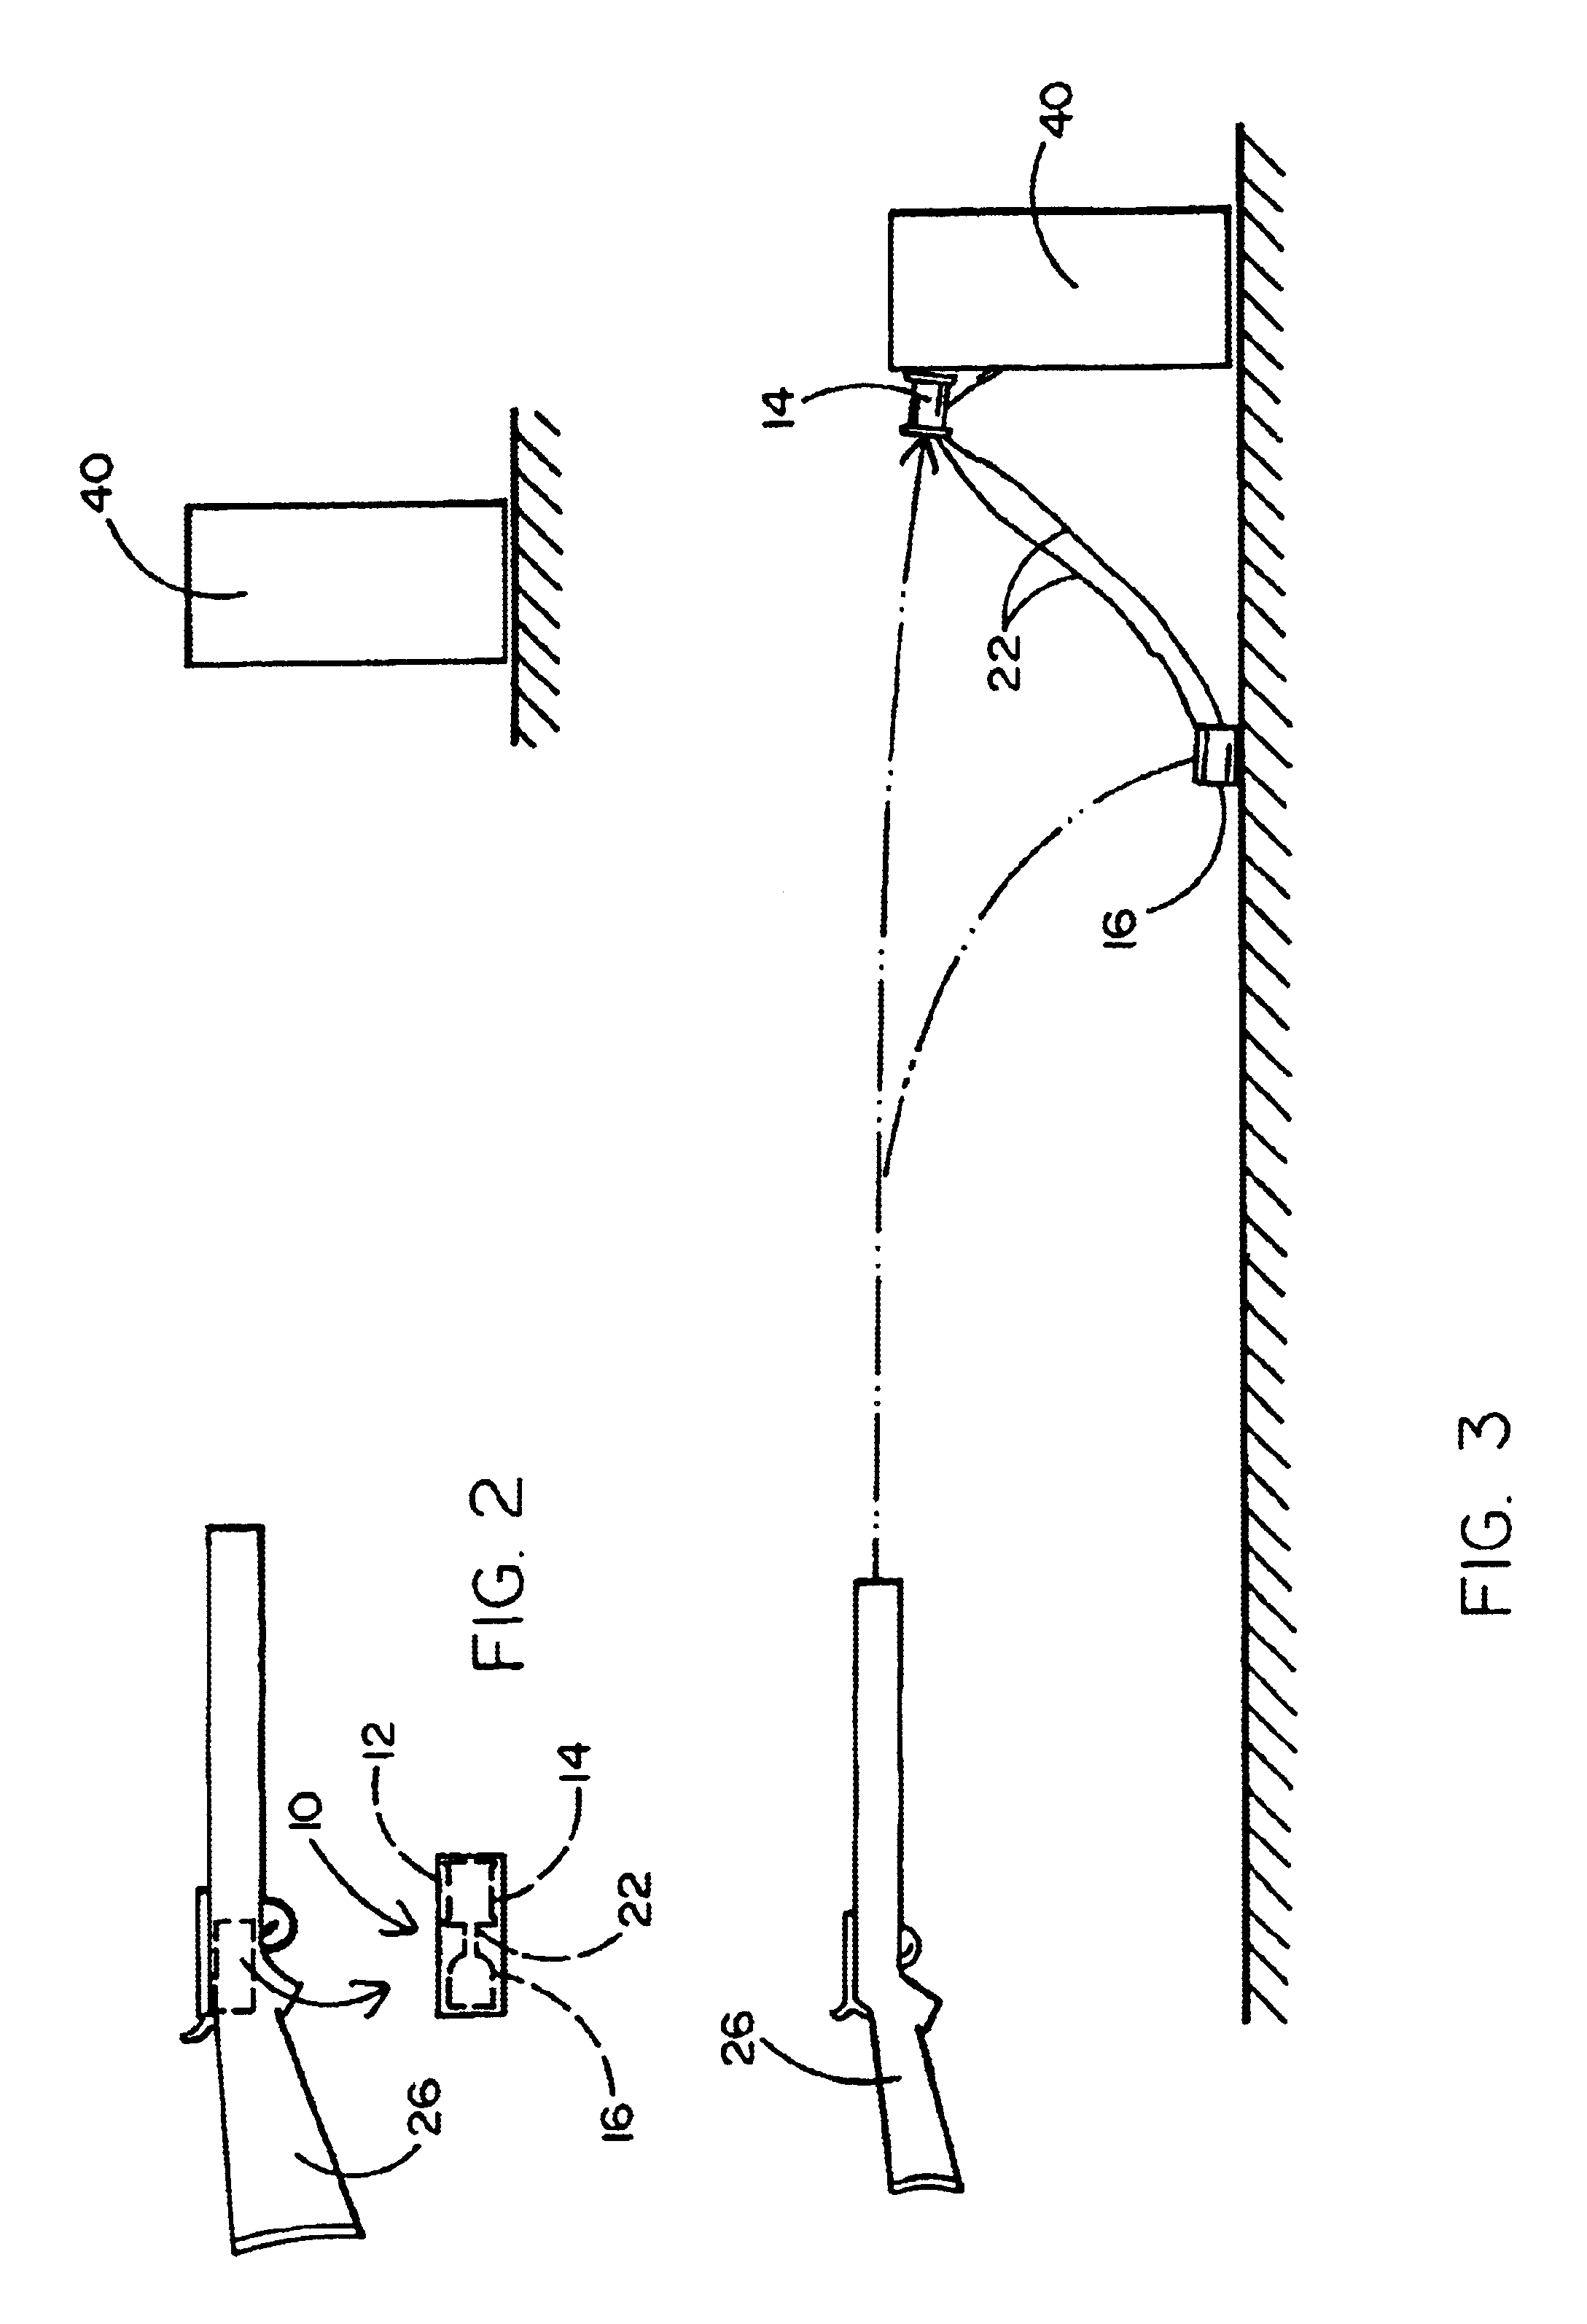 Multi-stage projectile weapon for immobilization and capture